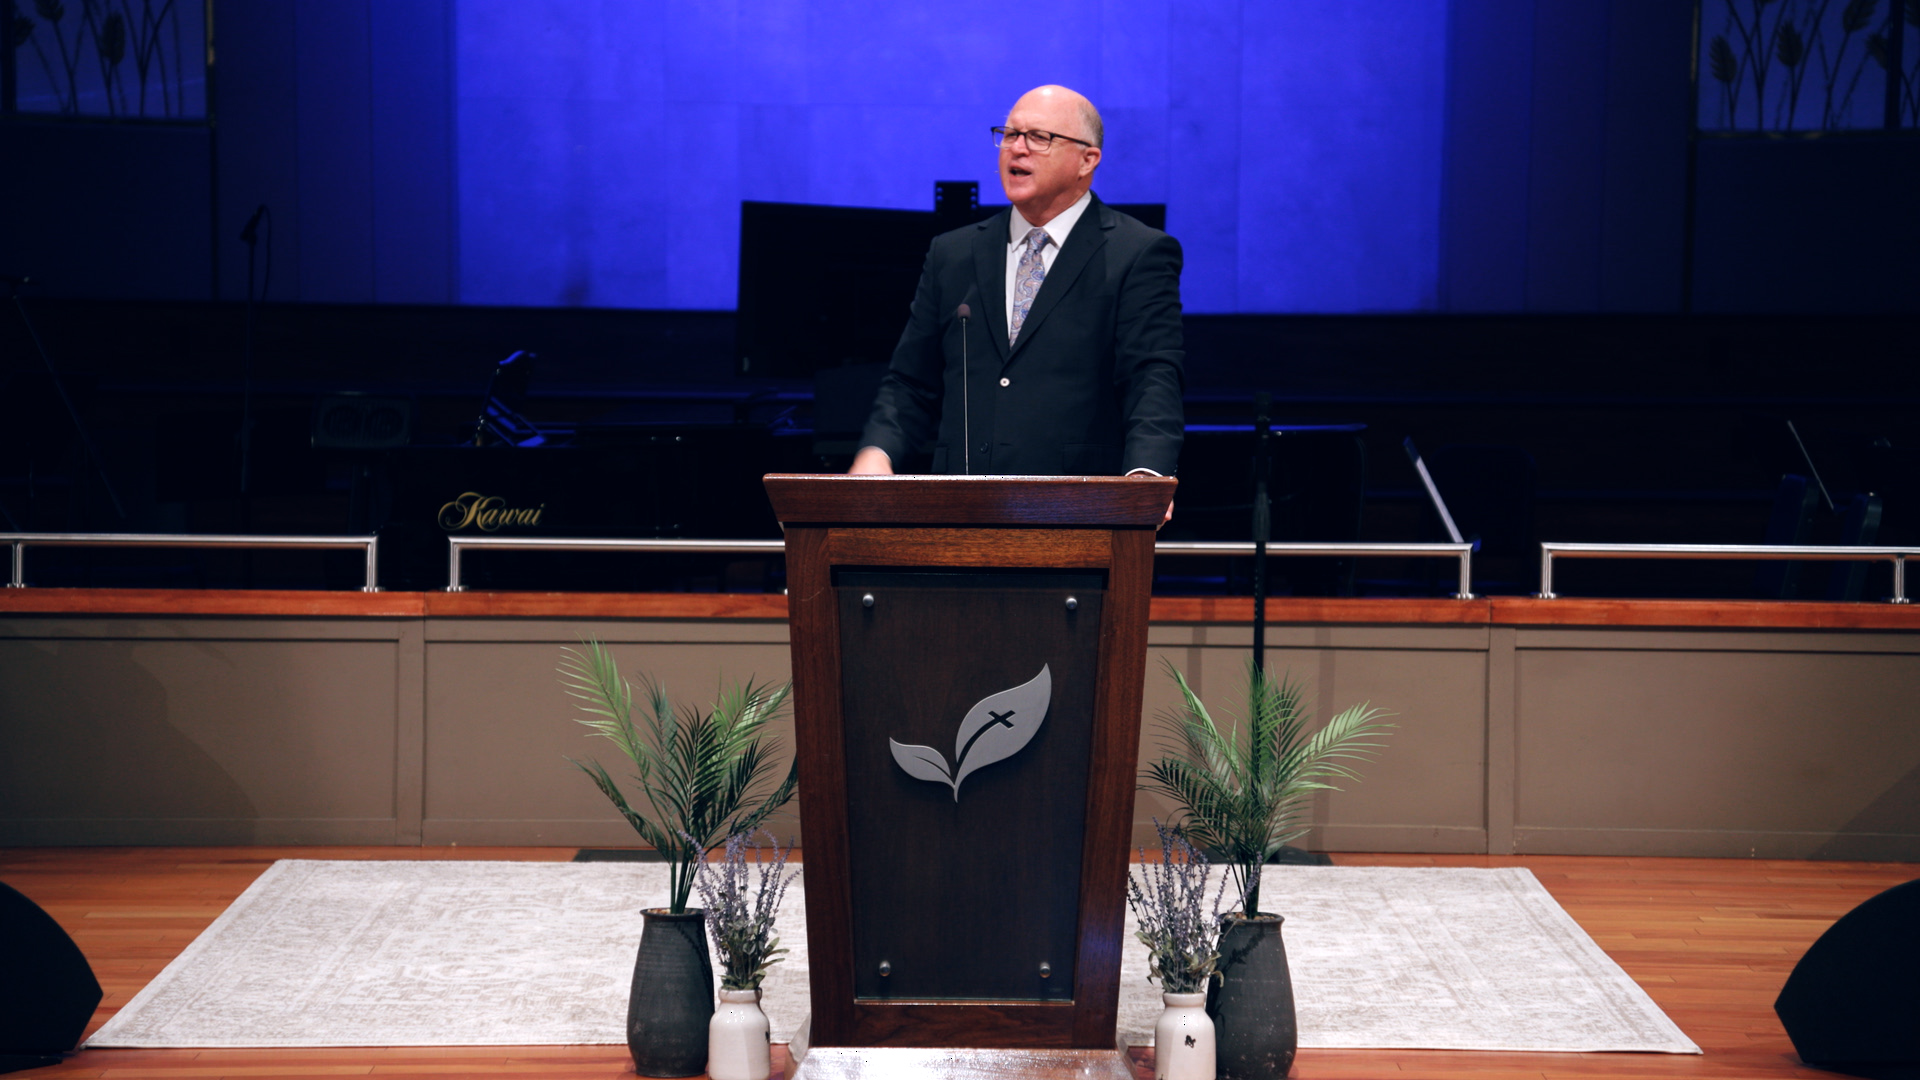 Pastor Paul Chappell: Courage In The Struggle